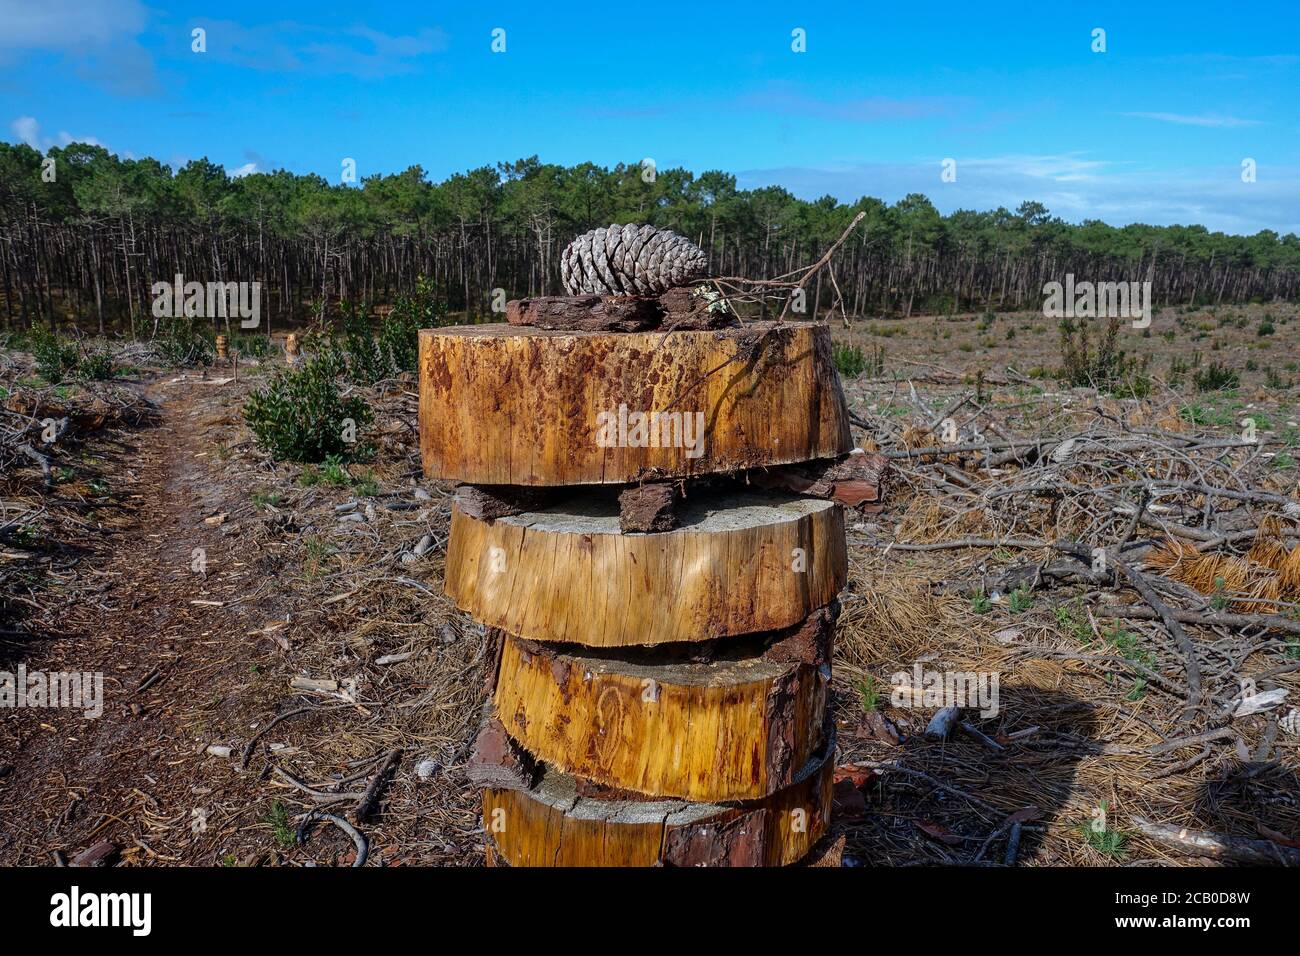 Symbolic tower of wood on a clearcut area in the forest with pine trees cut down as a form of deforestation contributing to climate change. Stock Photo